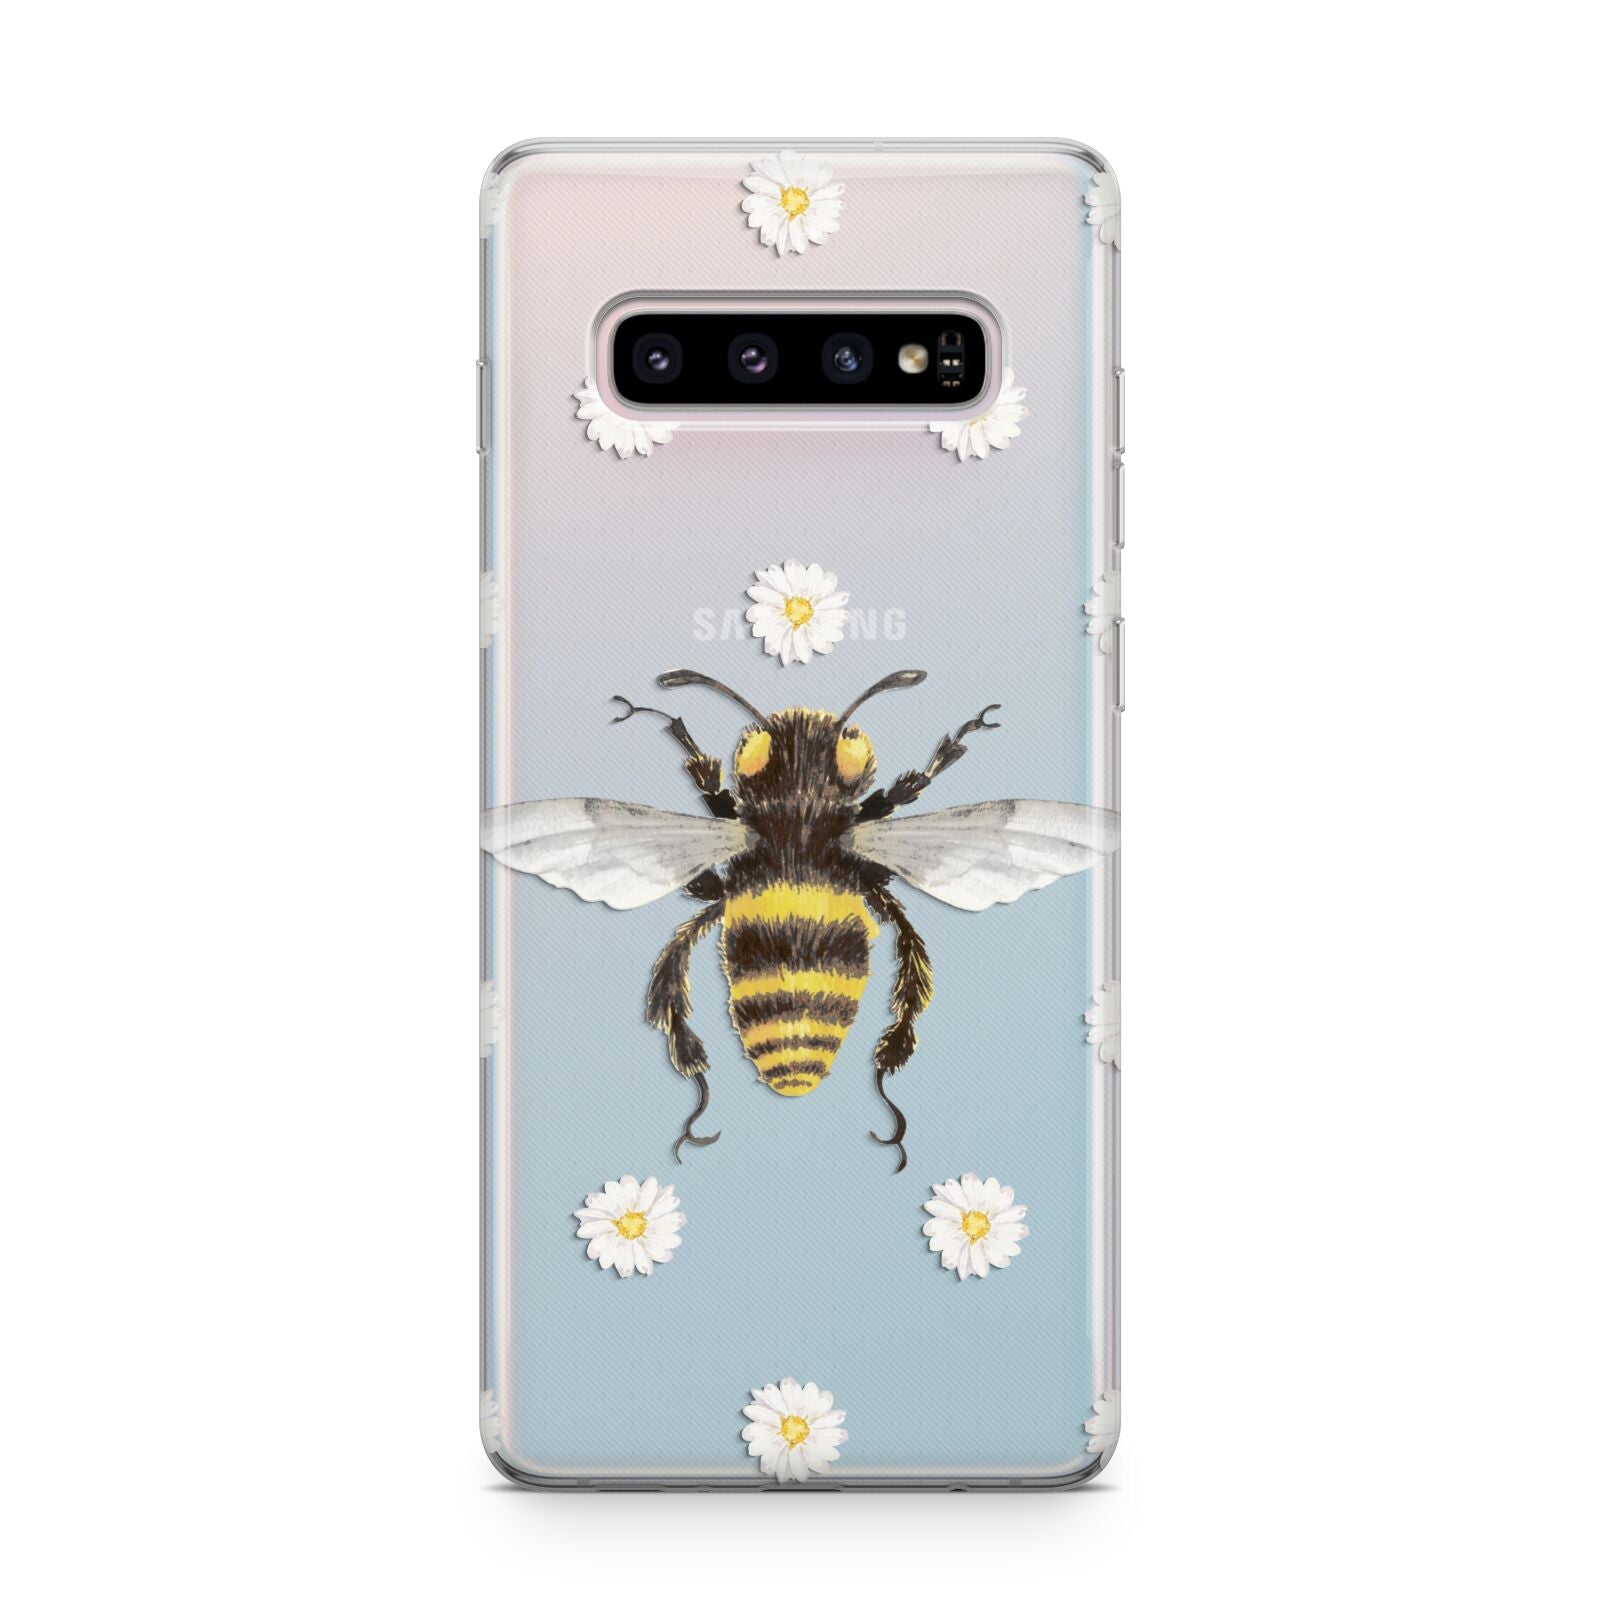 Bee Illustration with Daisies Samsung Galaxy S10 Plus Case